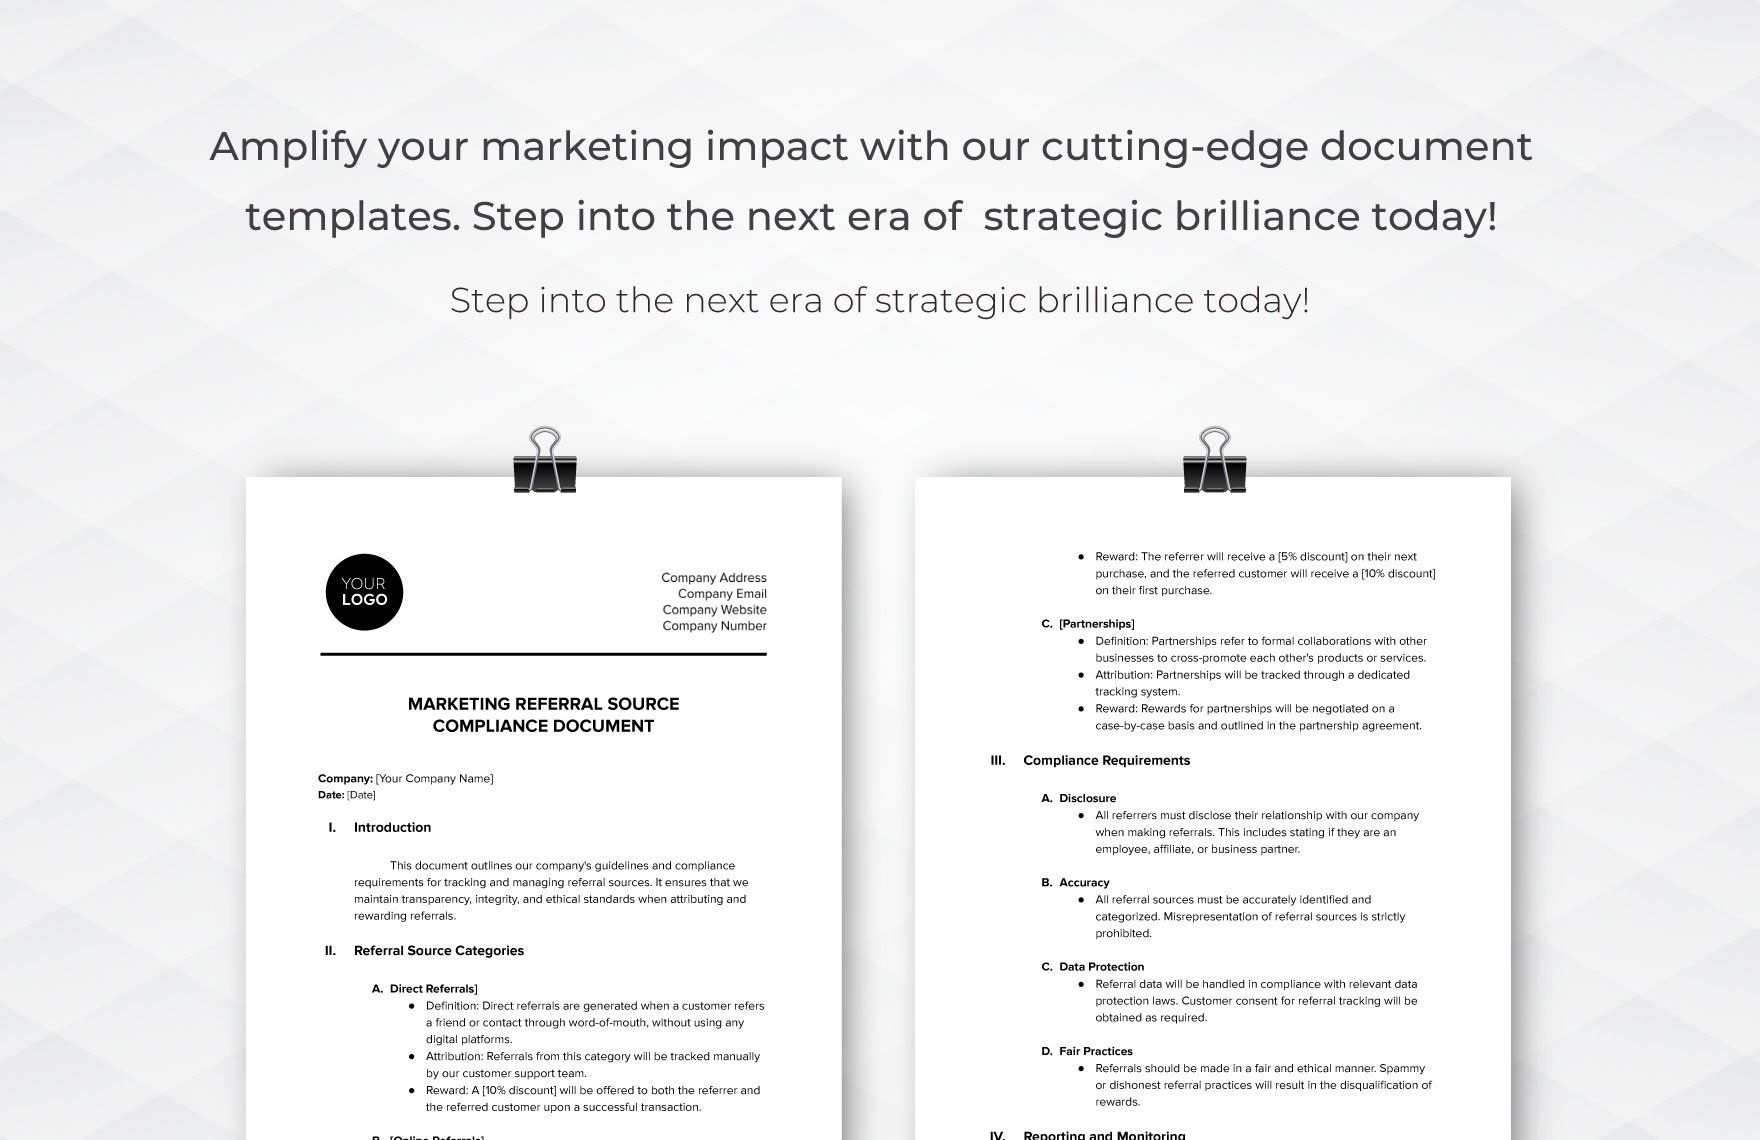 Marketing Referral Source Compliance Document Template